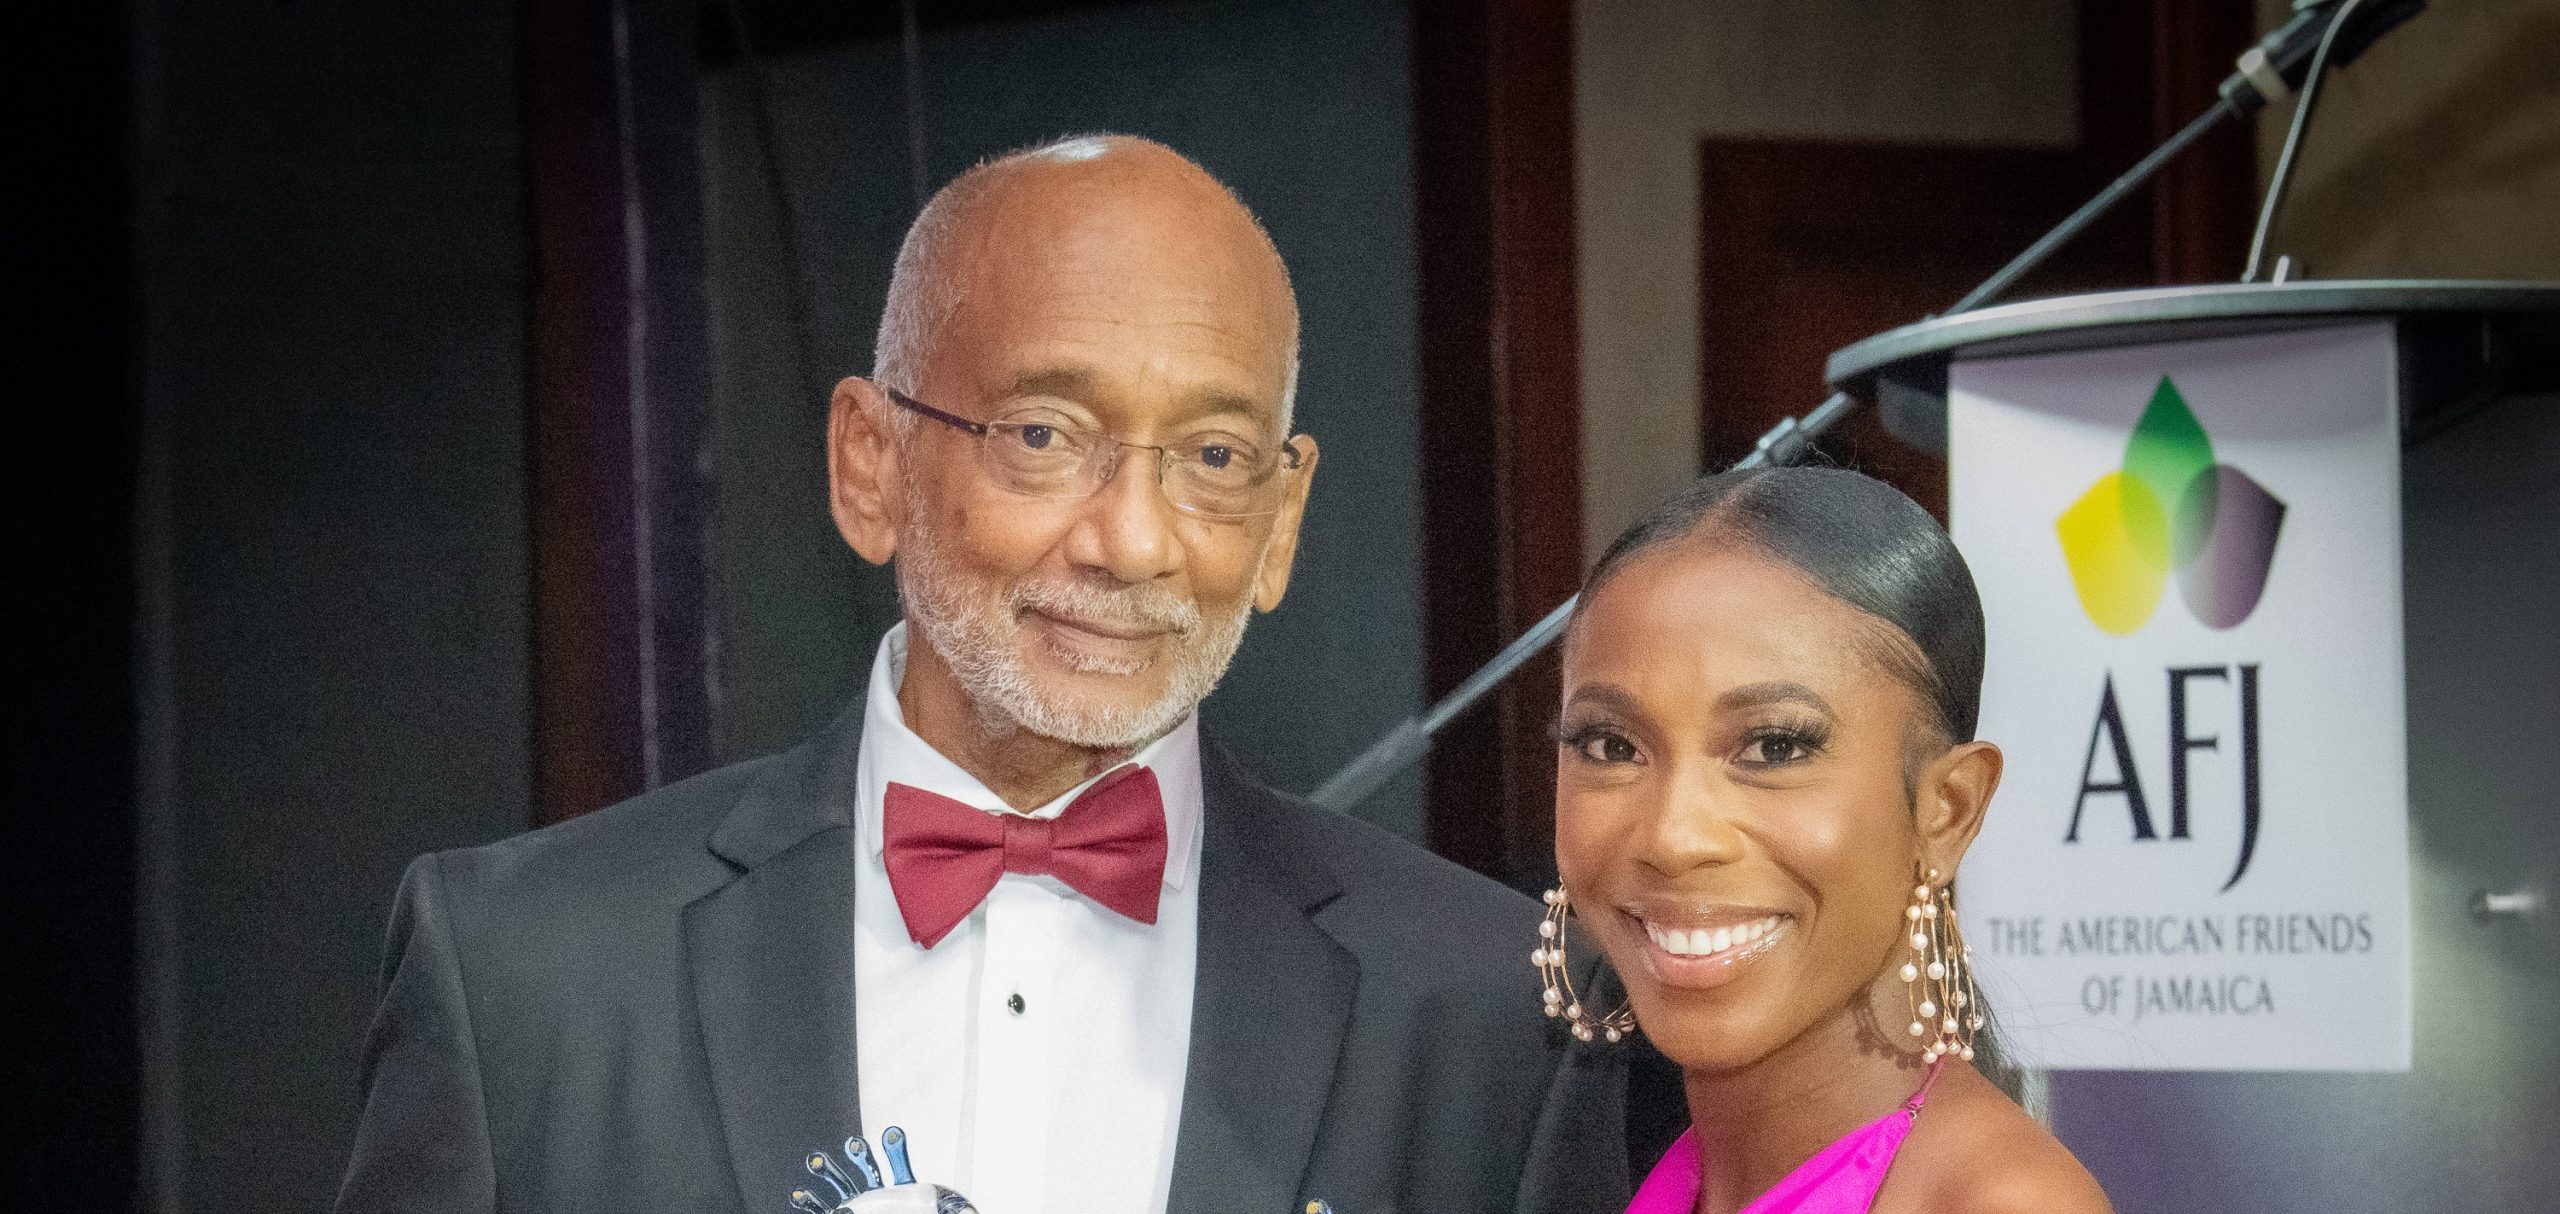 Douglas Orane and Shelly-Ann Fraser-Pryce Honored at AFJ Charity Gala in Miami